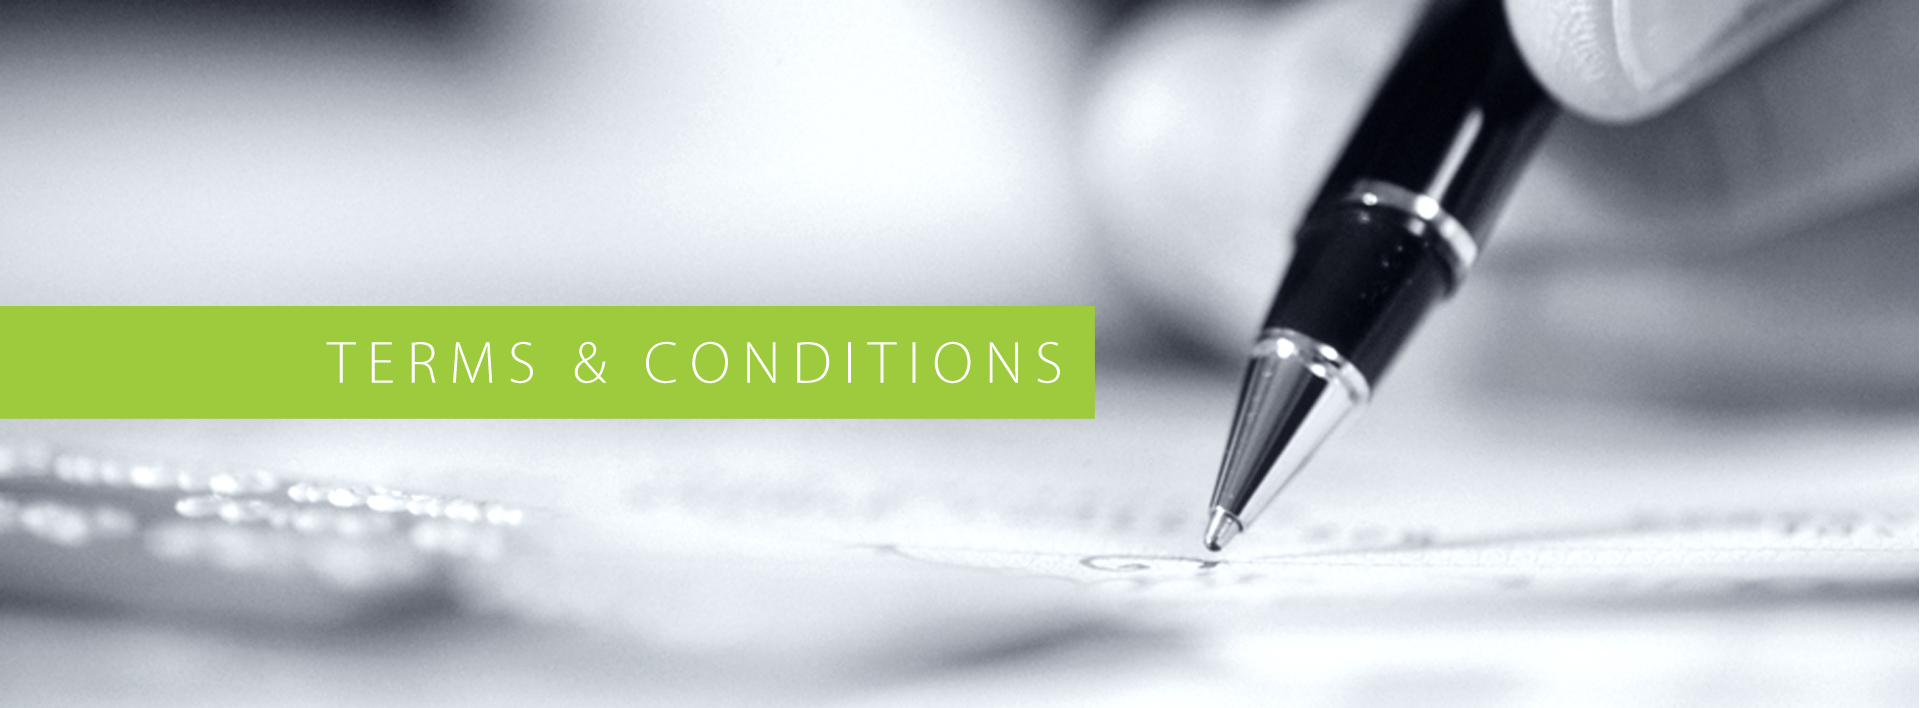 Terms_Conditions_green31